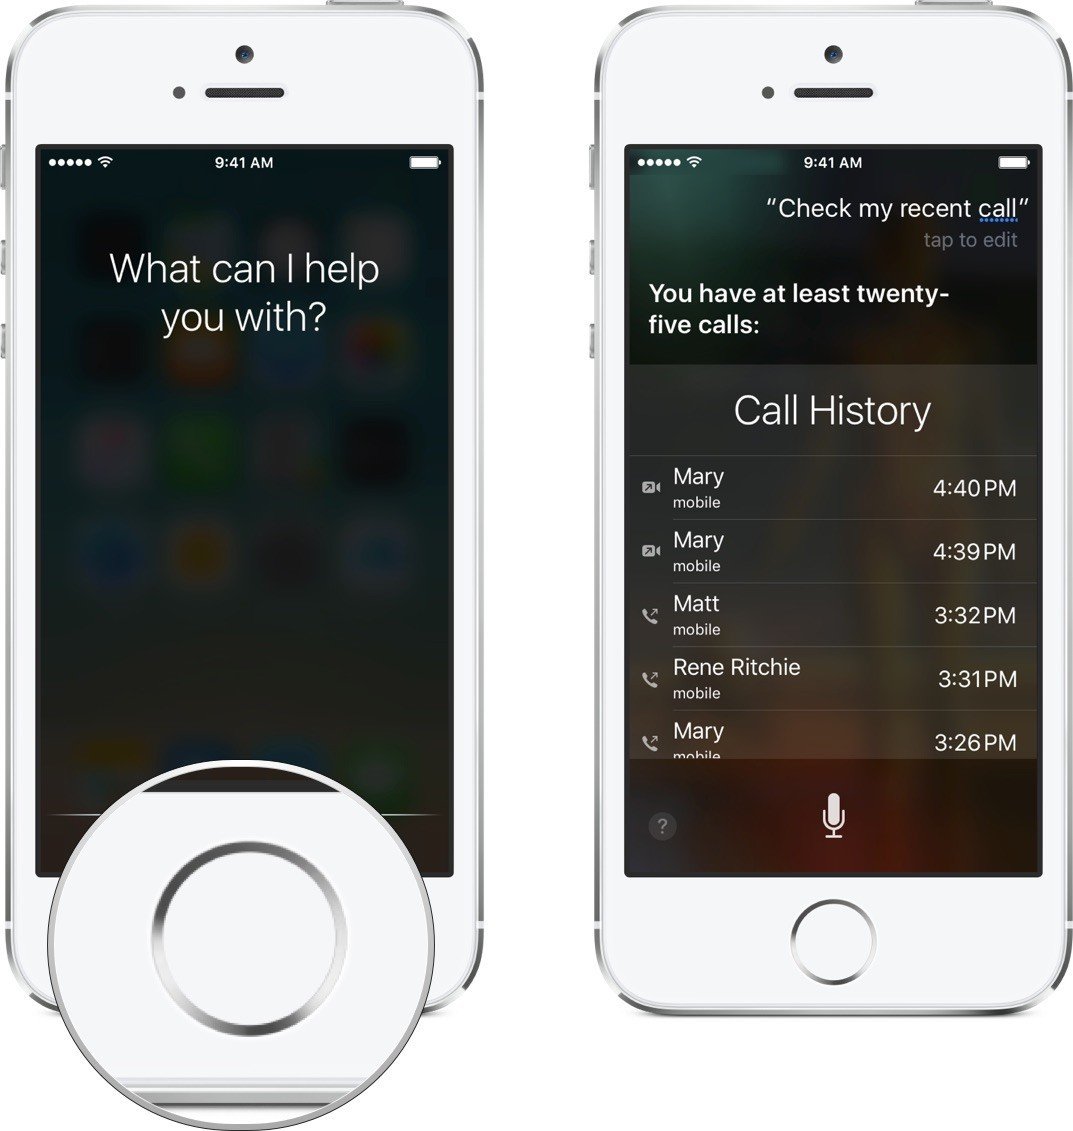 How to check your iPhone call history using Siri